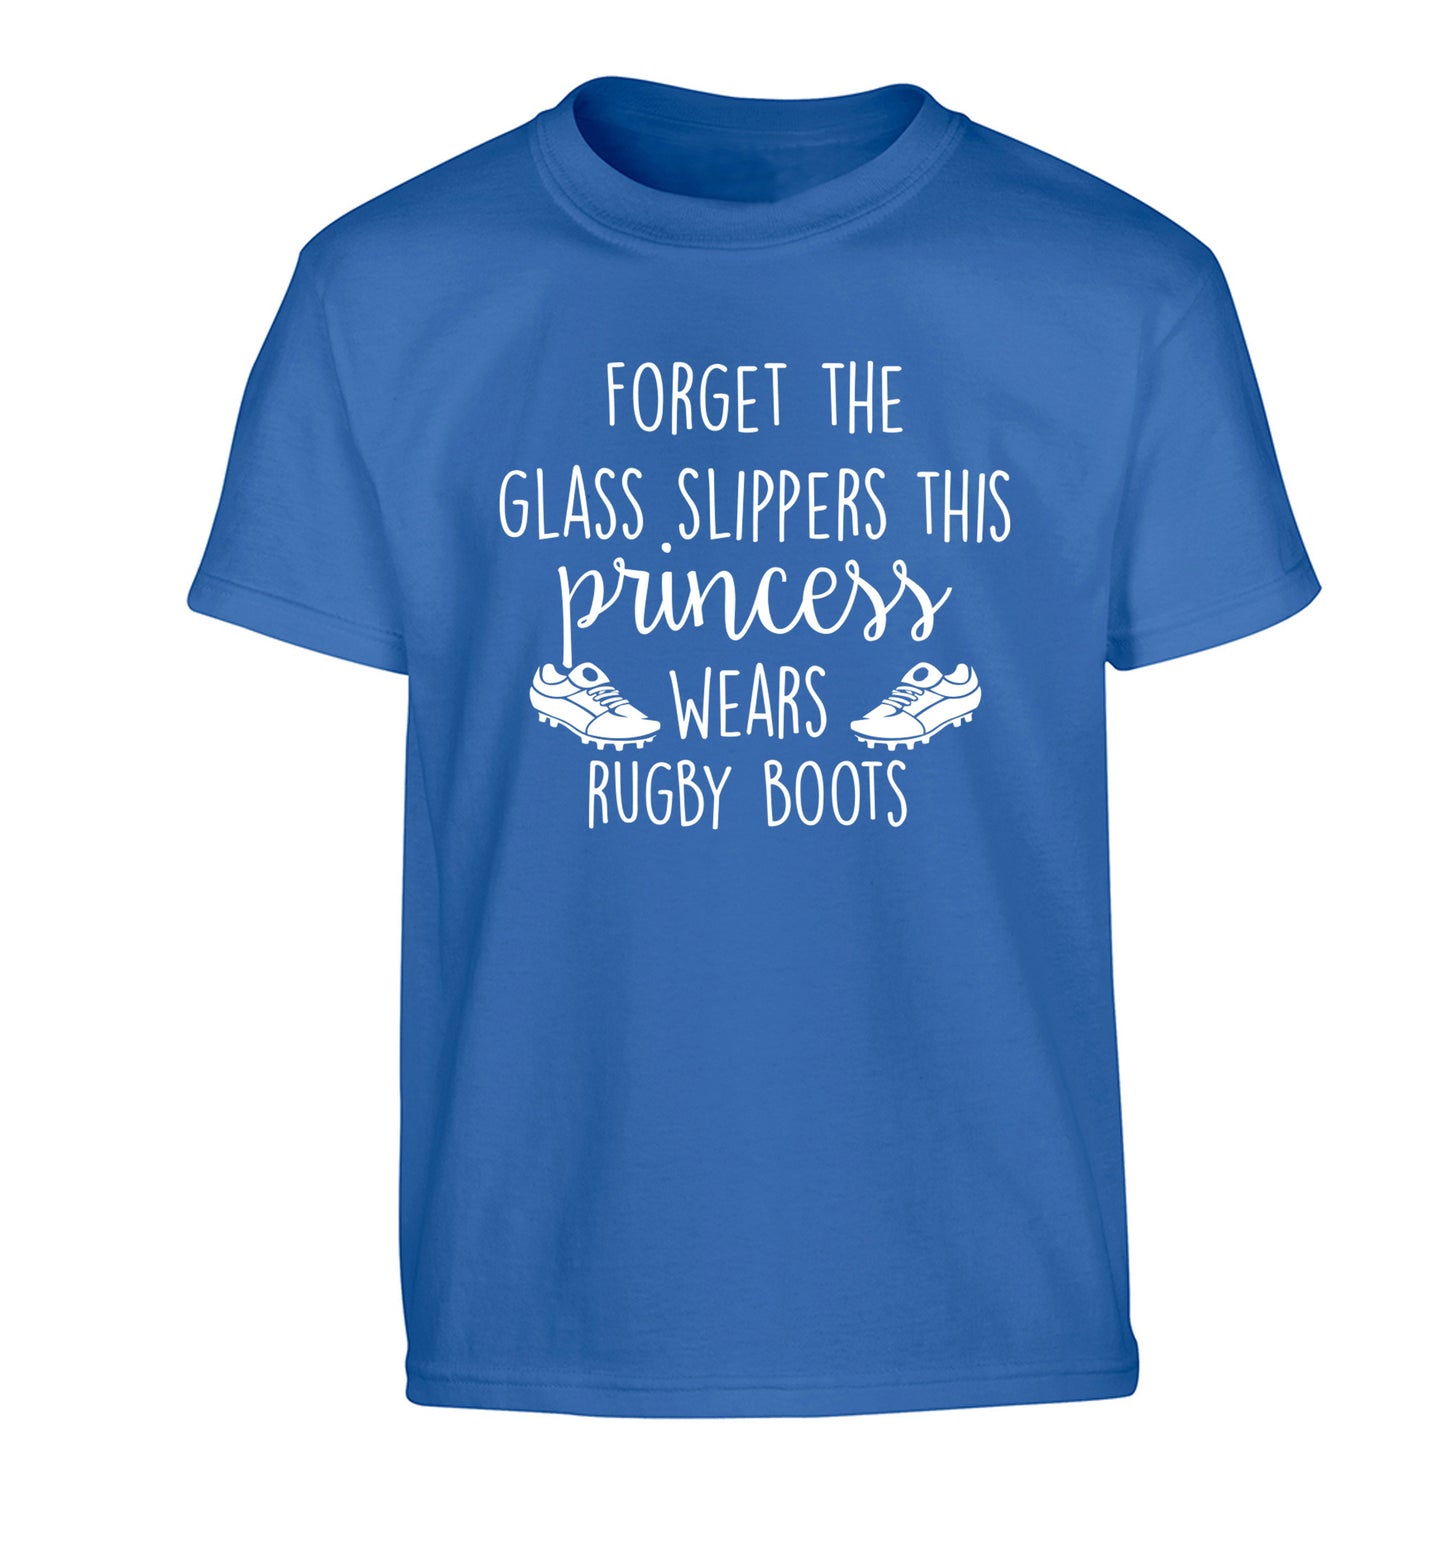 Forget the glass slippers this princess wears rugby boots Children's blue Tshirt 12-14 Years